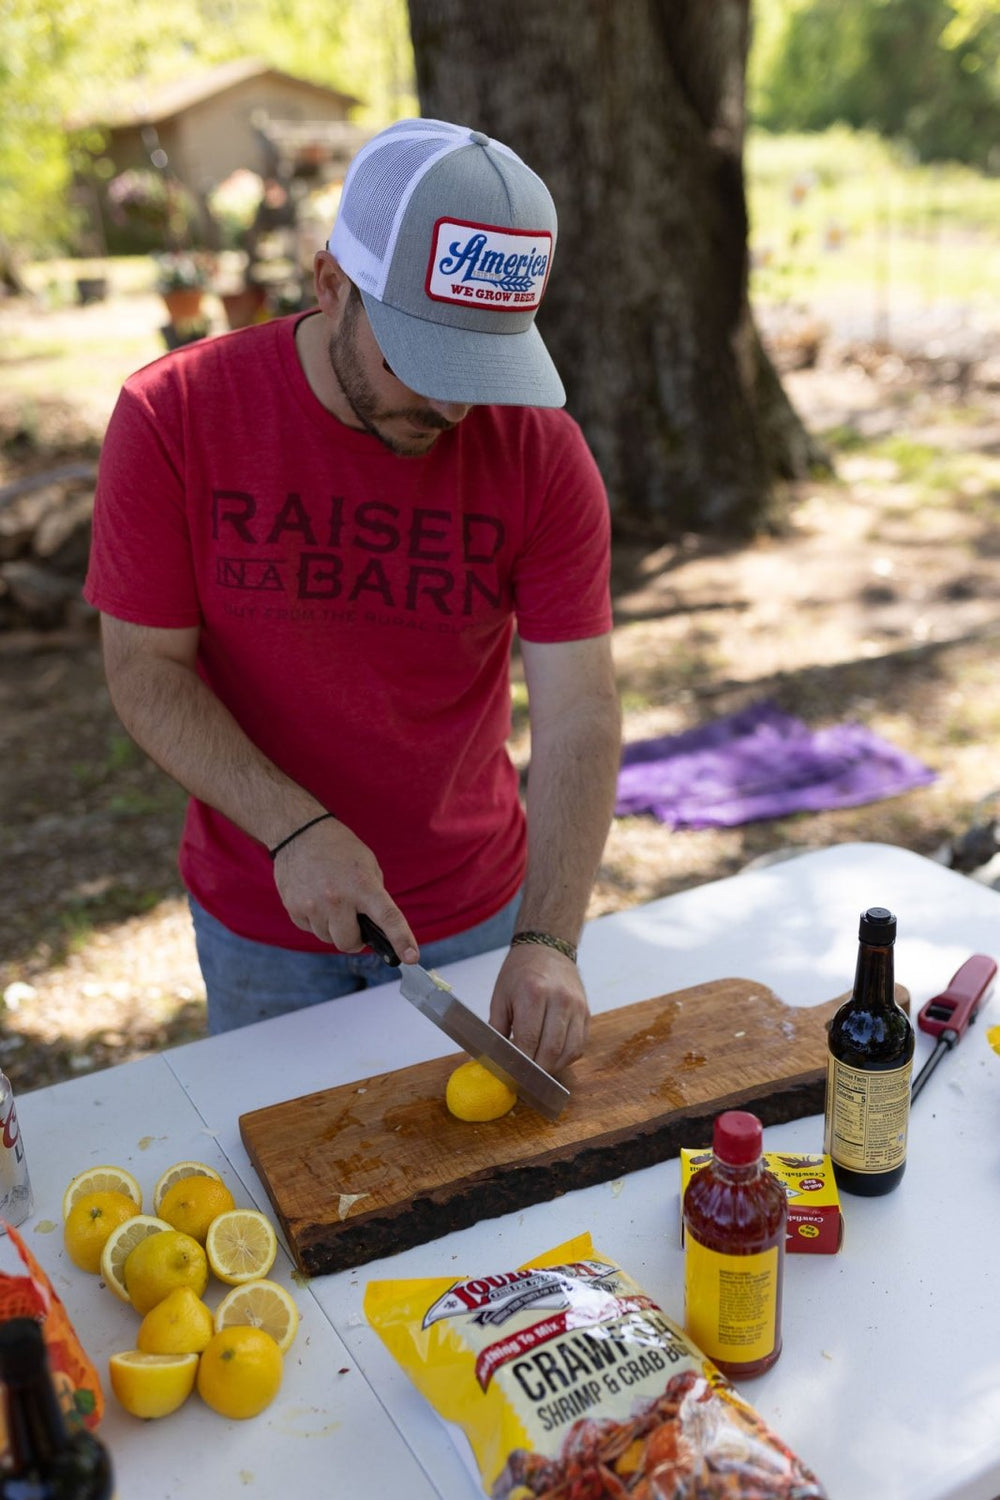 A man wearing a red "Raised In A Barn" vintage fitted shirt by Rural Cloth and a baseball cap is cutting a lemon on a wooden cutting board outdoors. Various ingredients, including Cajun seasoning and lemons, are on the table. There is a tree and greenery in the background.